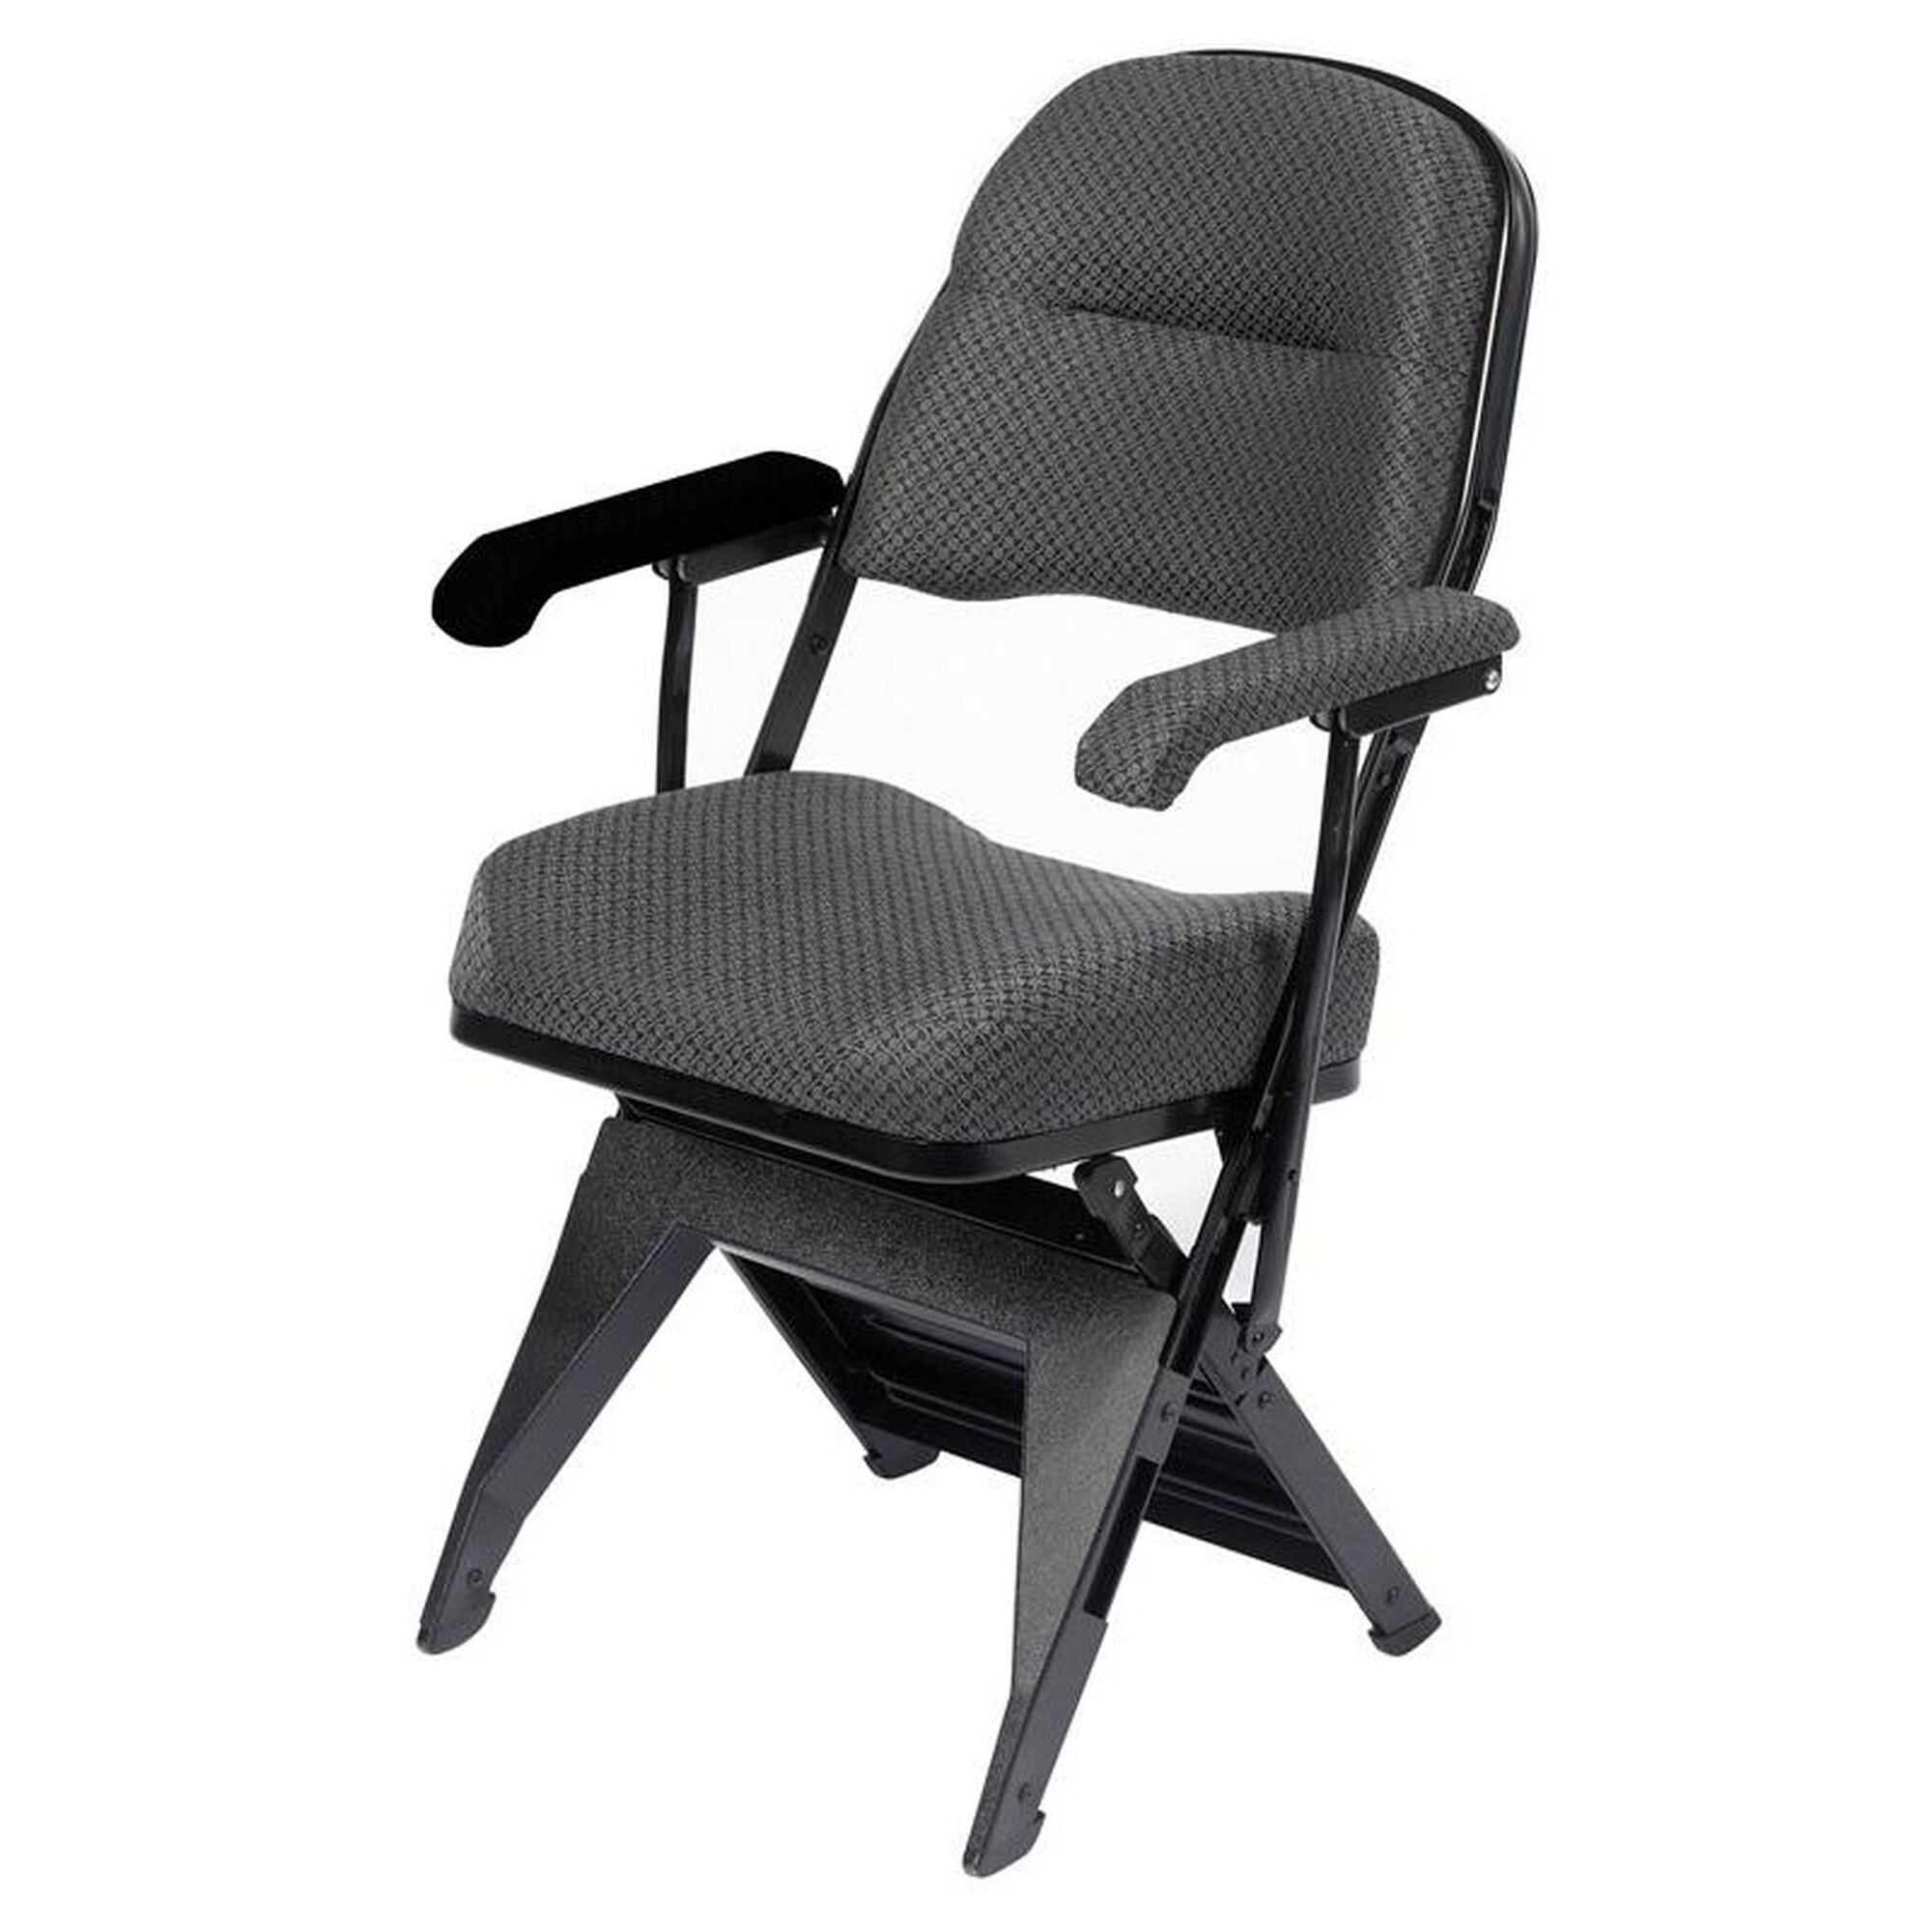 Our club series upholstered seat and back folding chair